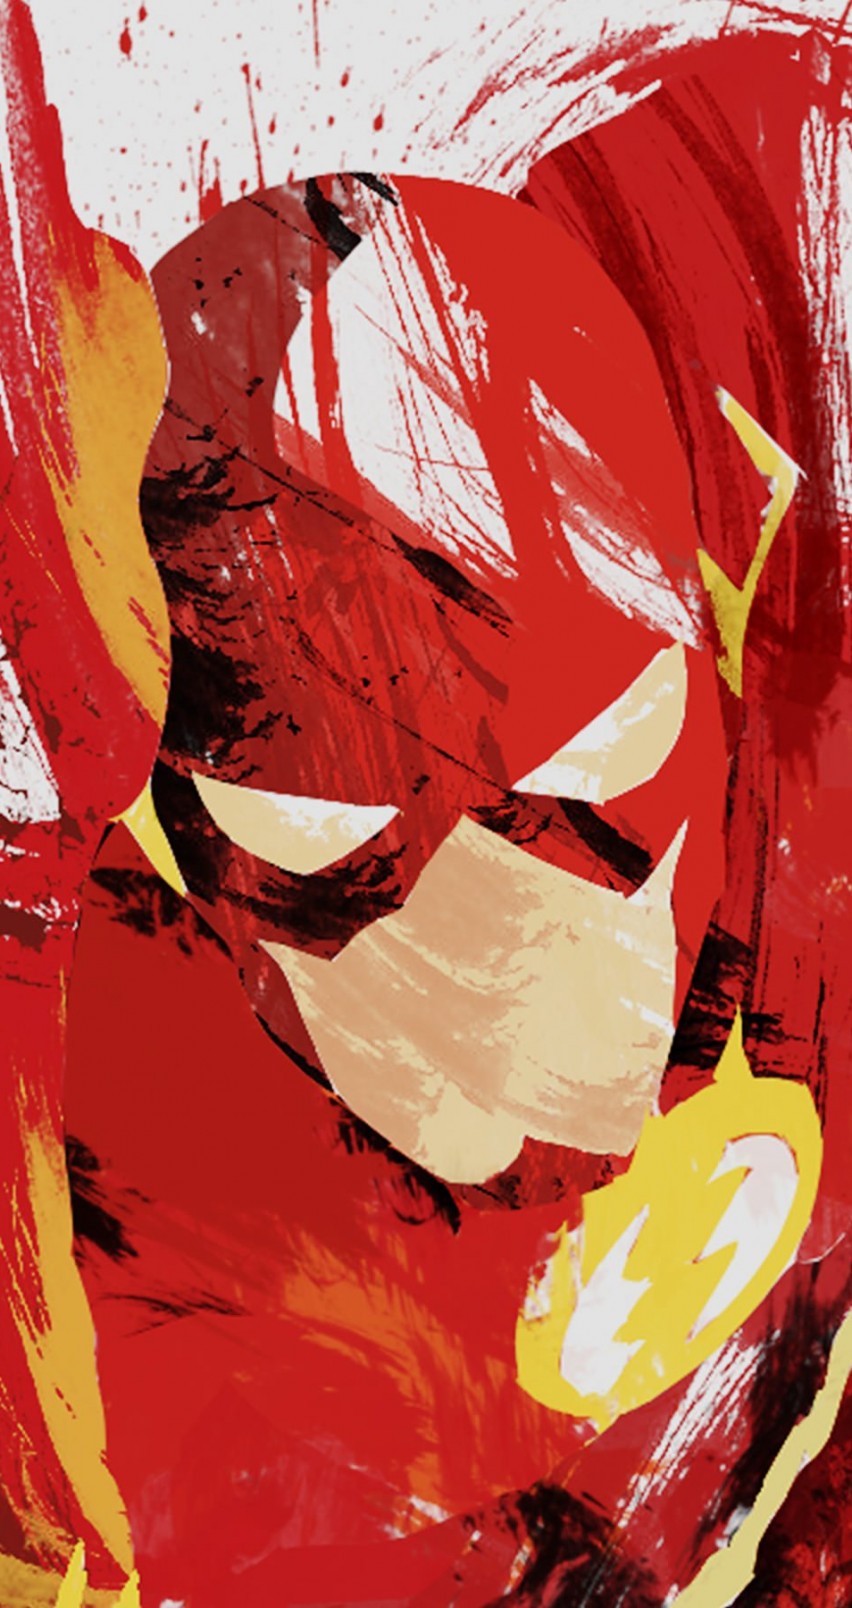 The Flash Illustration Wallpaper for Apple iPhone 6 / 6s